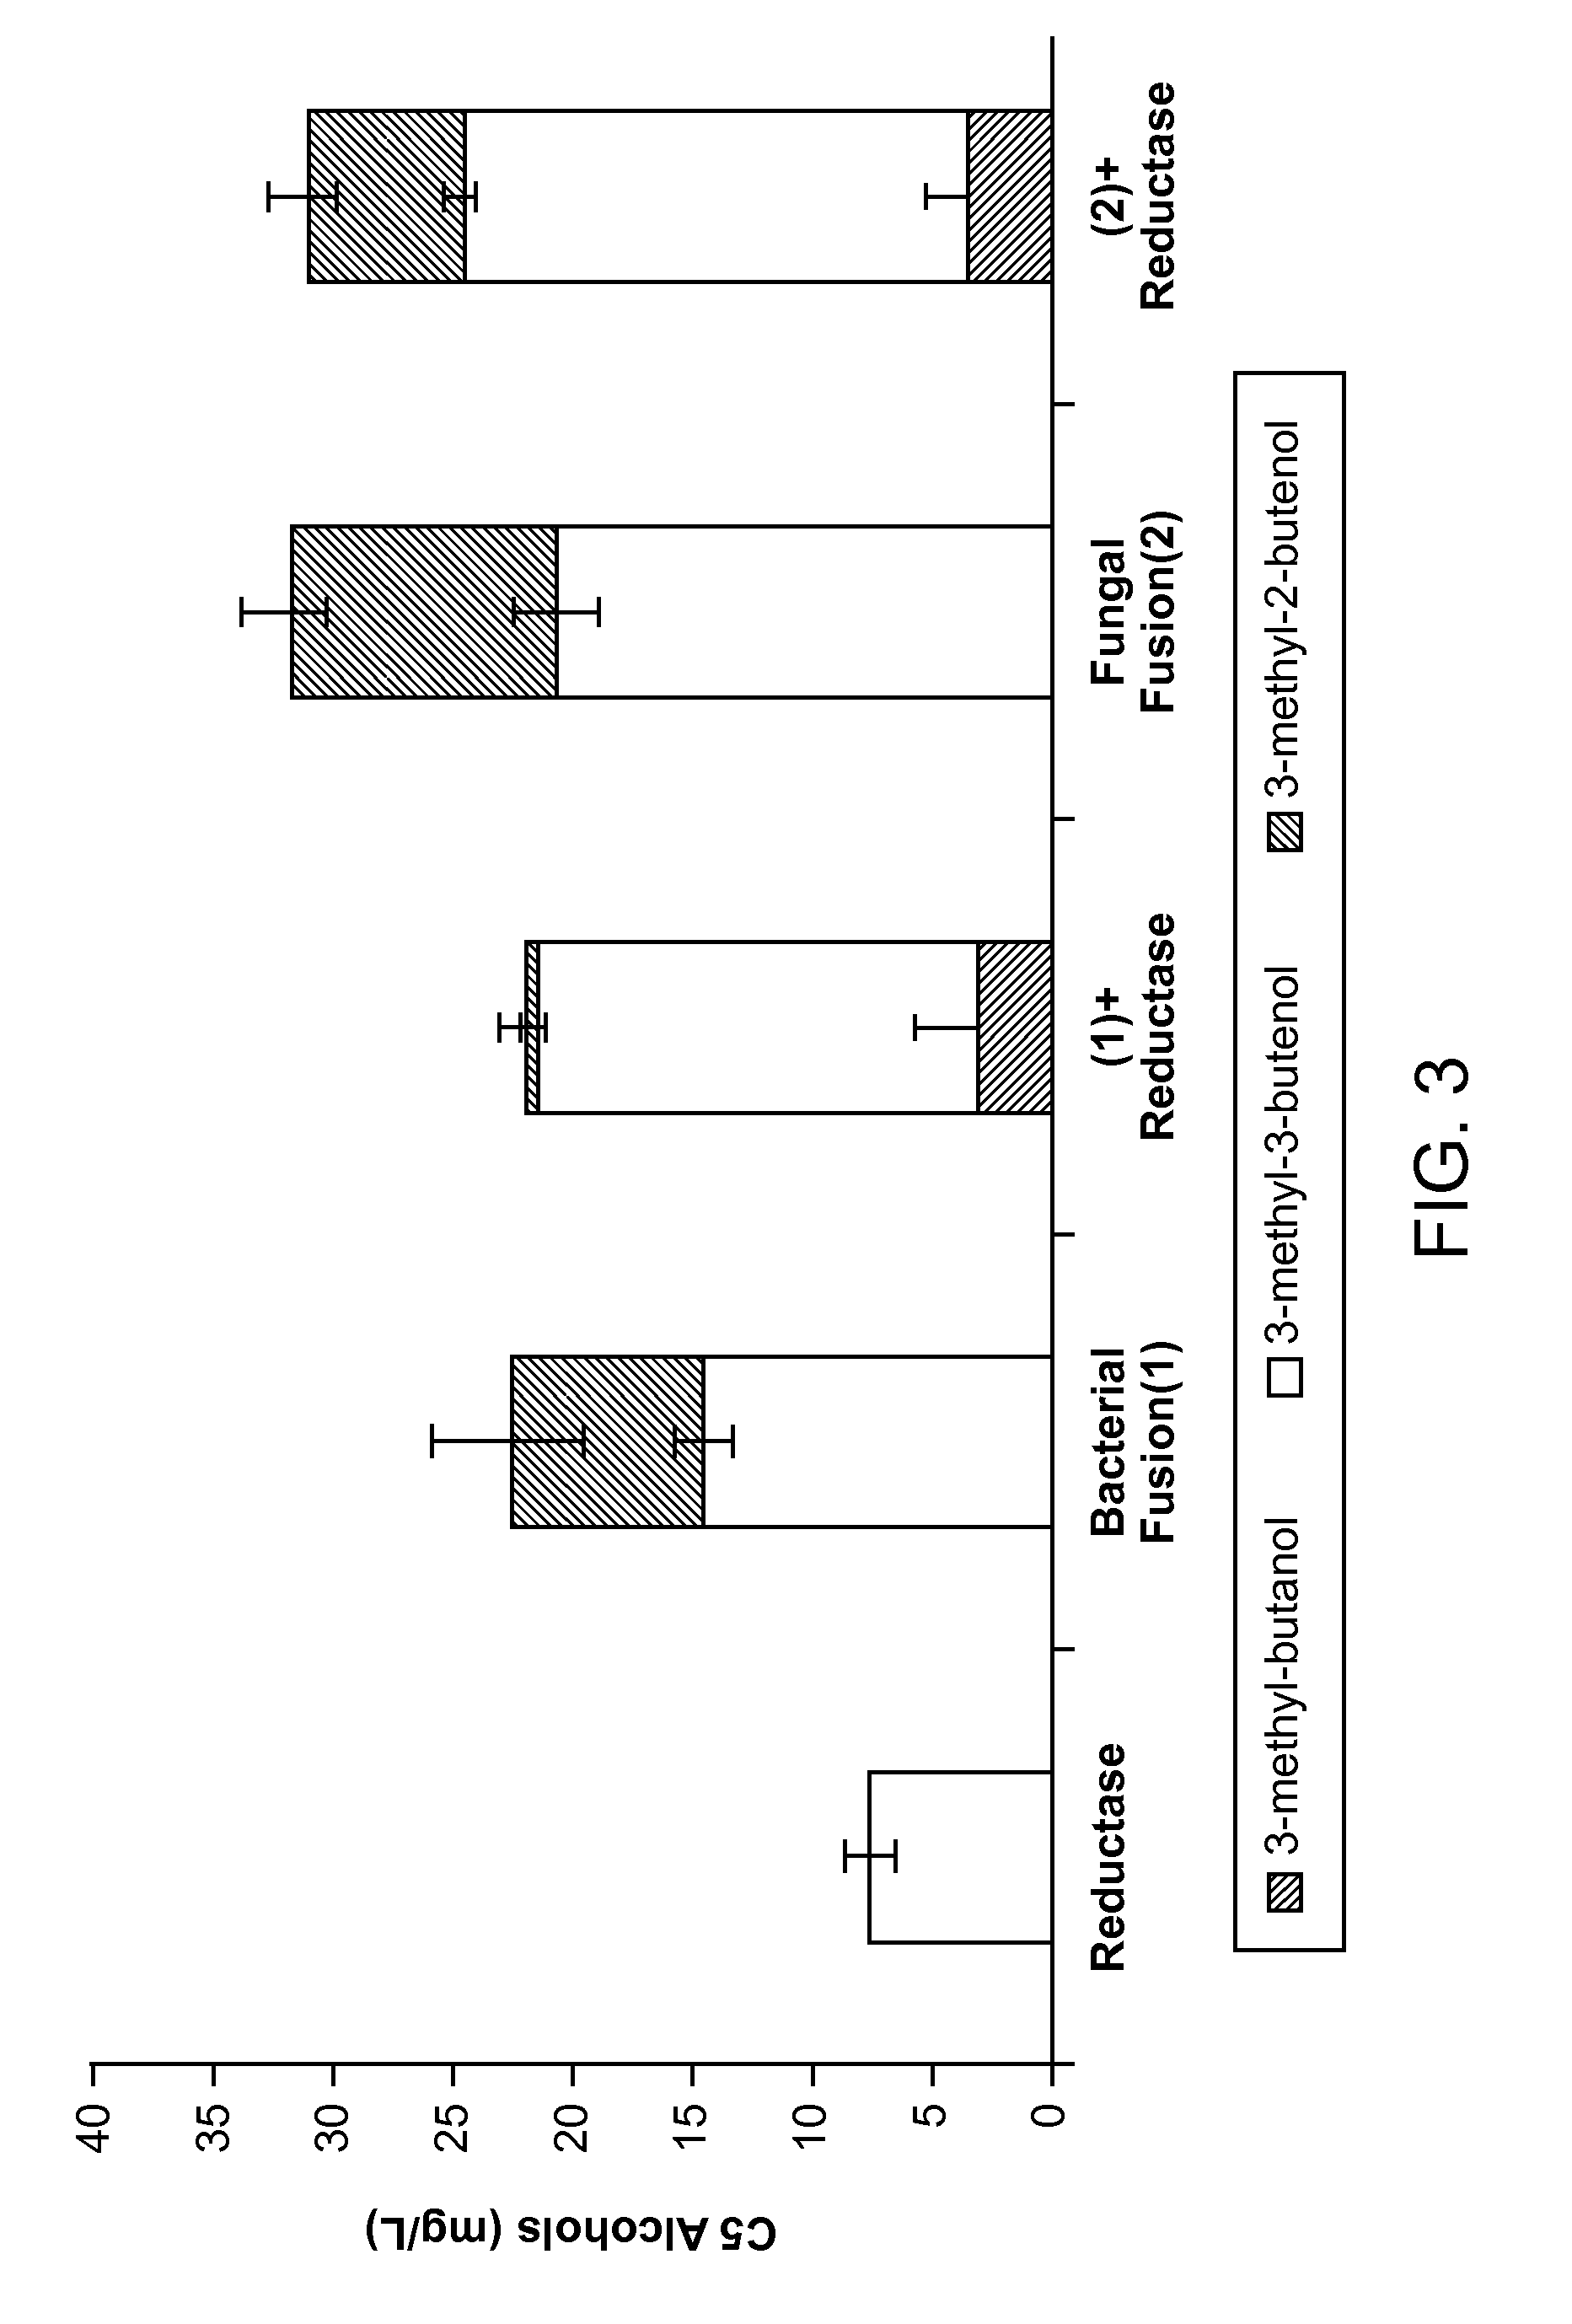 Methods for increasing production of 3-methyl-2-butenol using fusion proteins